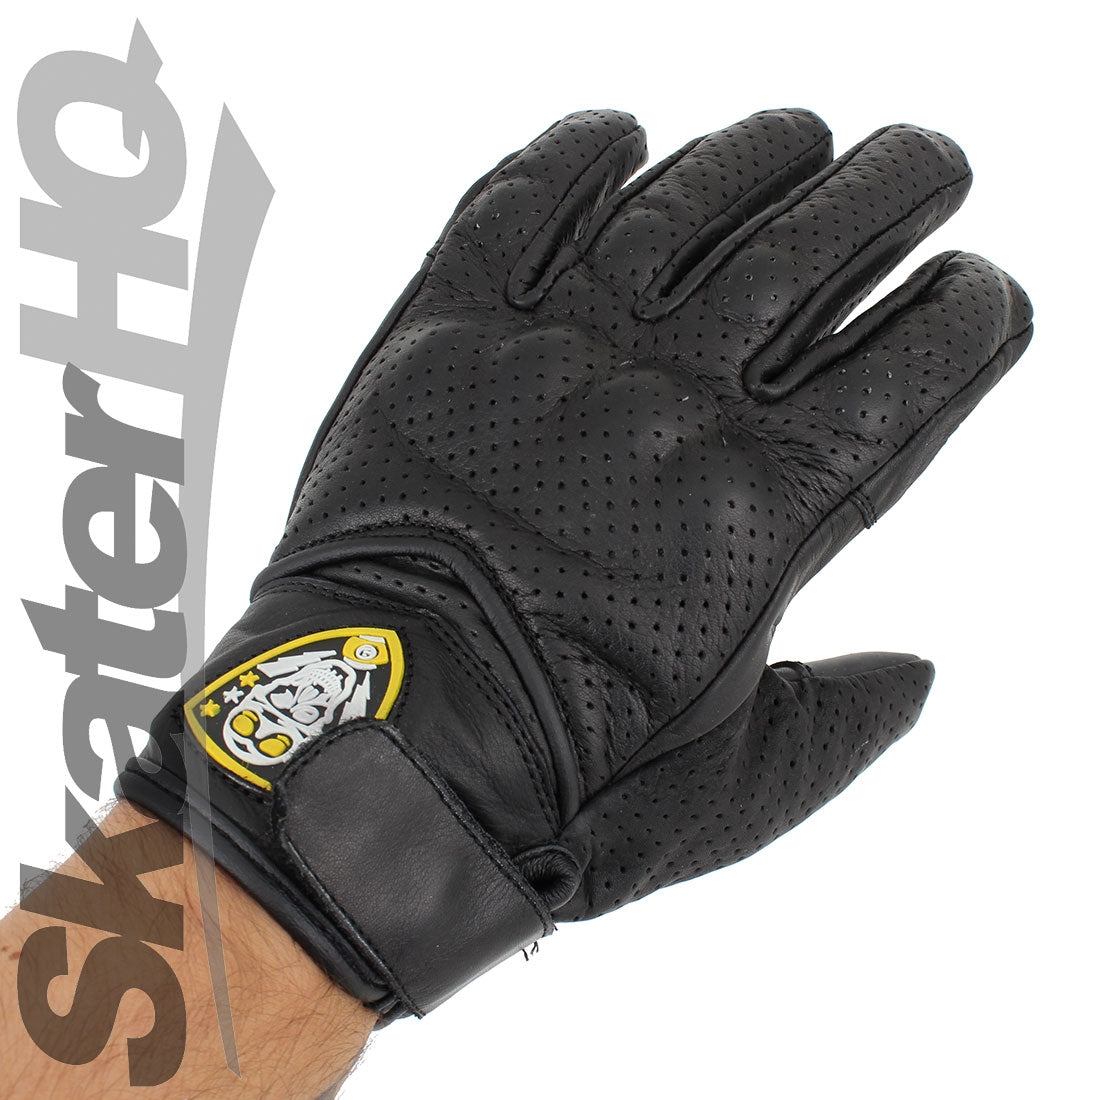 Sector 9 Lightning Glove - S/M Protective Gear